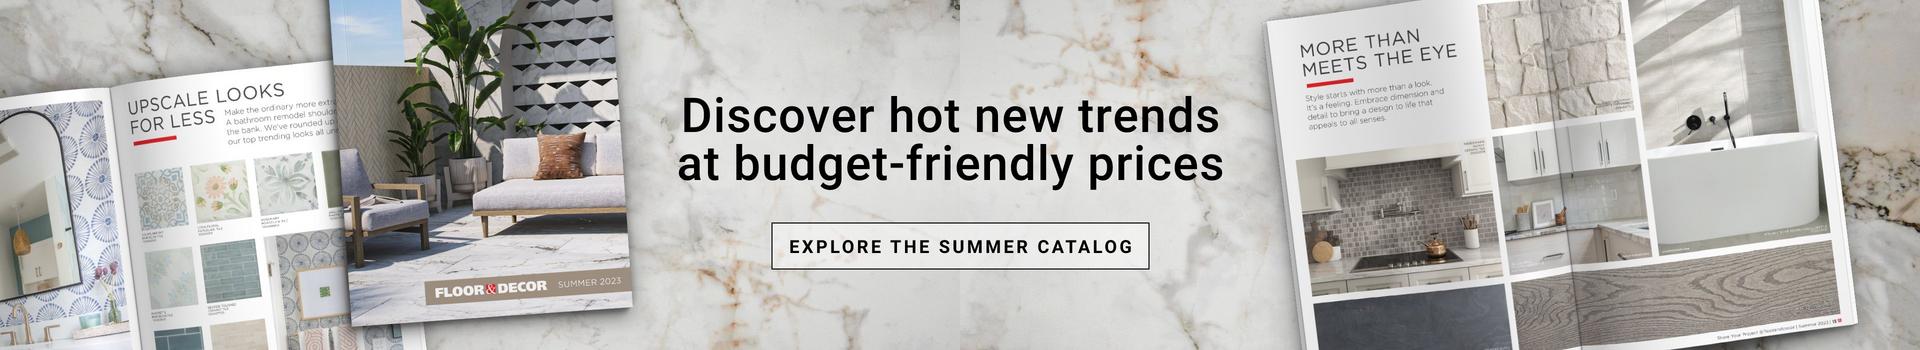 Discover hot new trends at budget-friendly prices. Summer Catalog